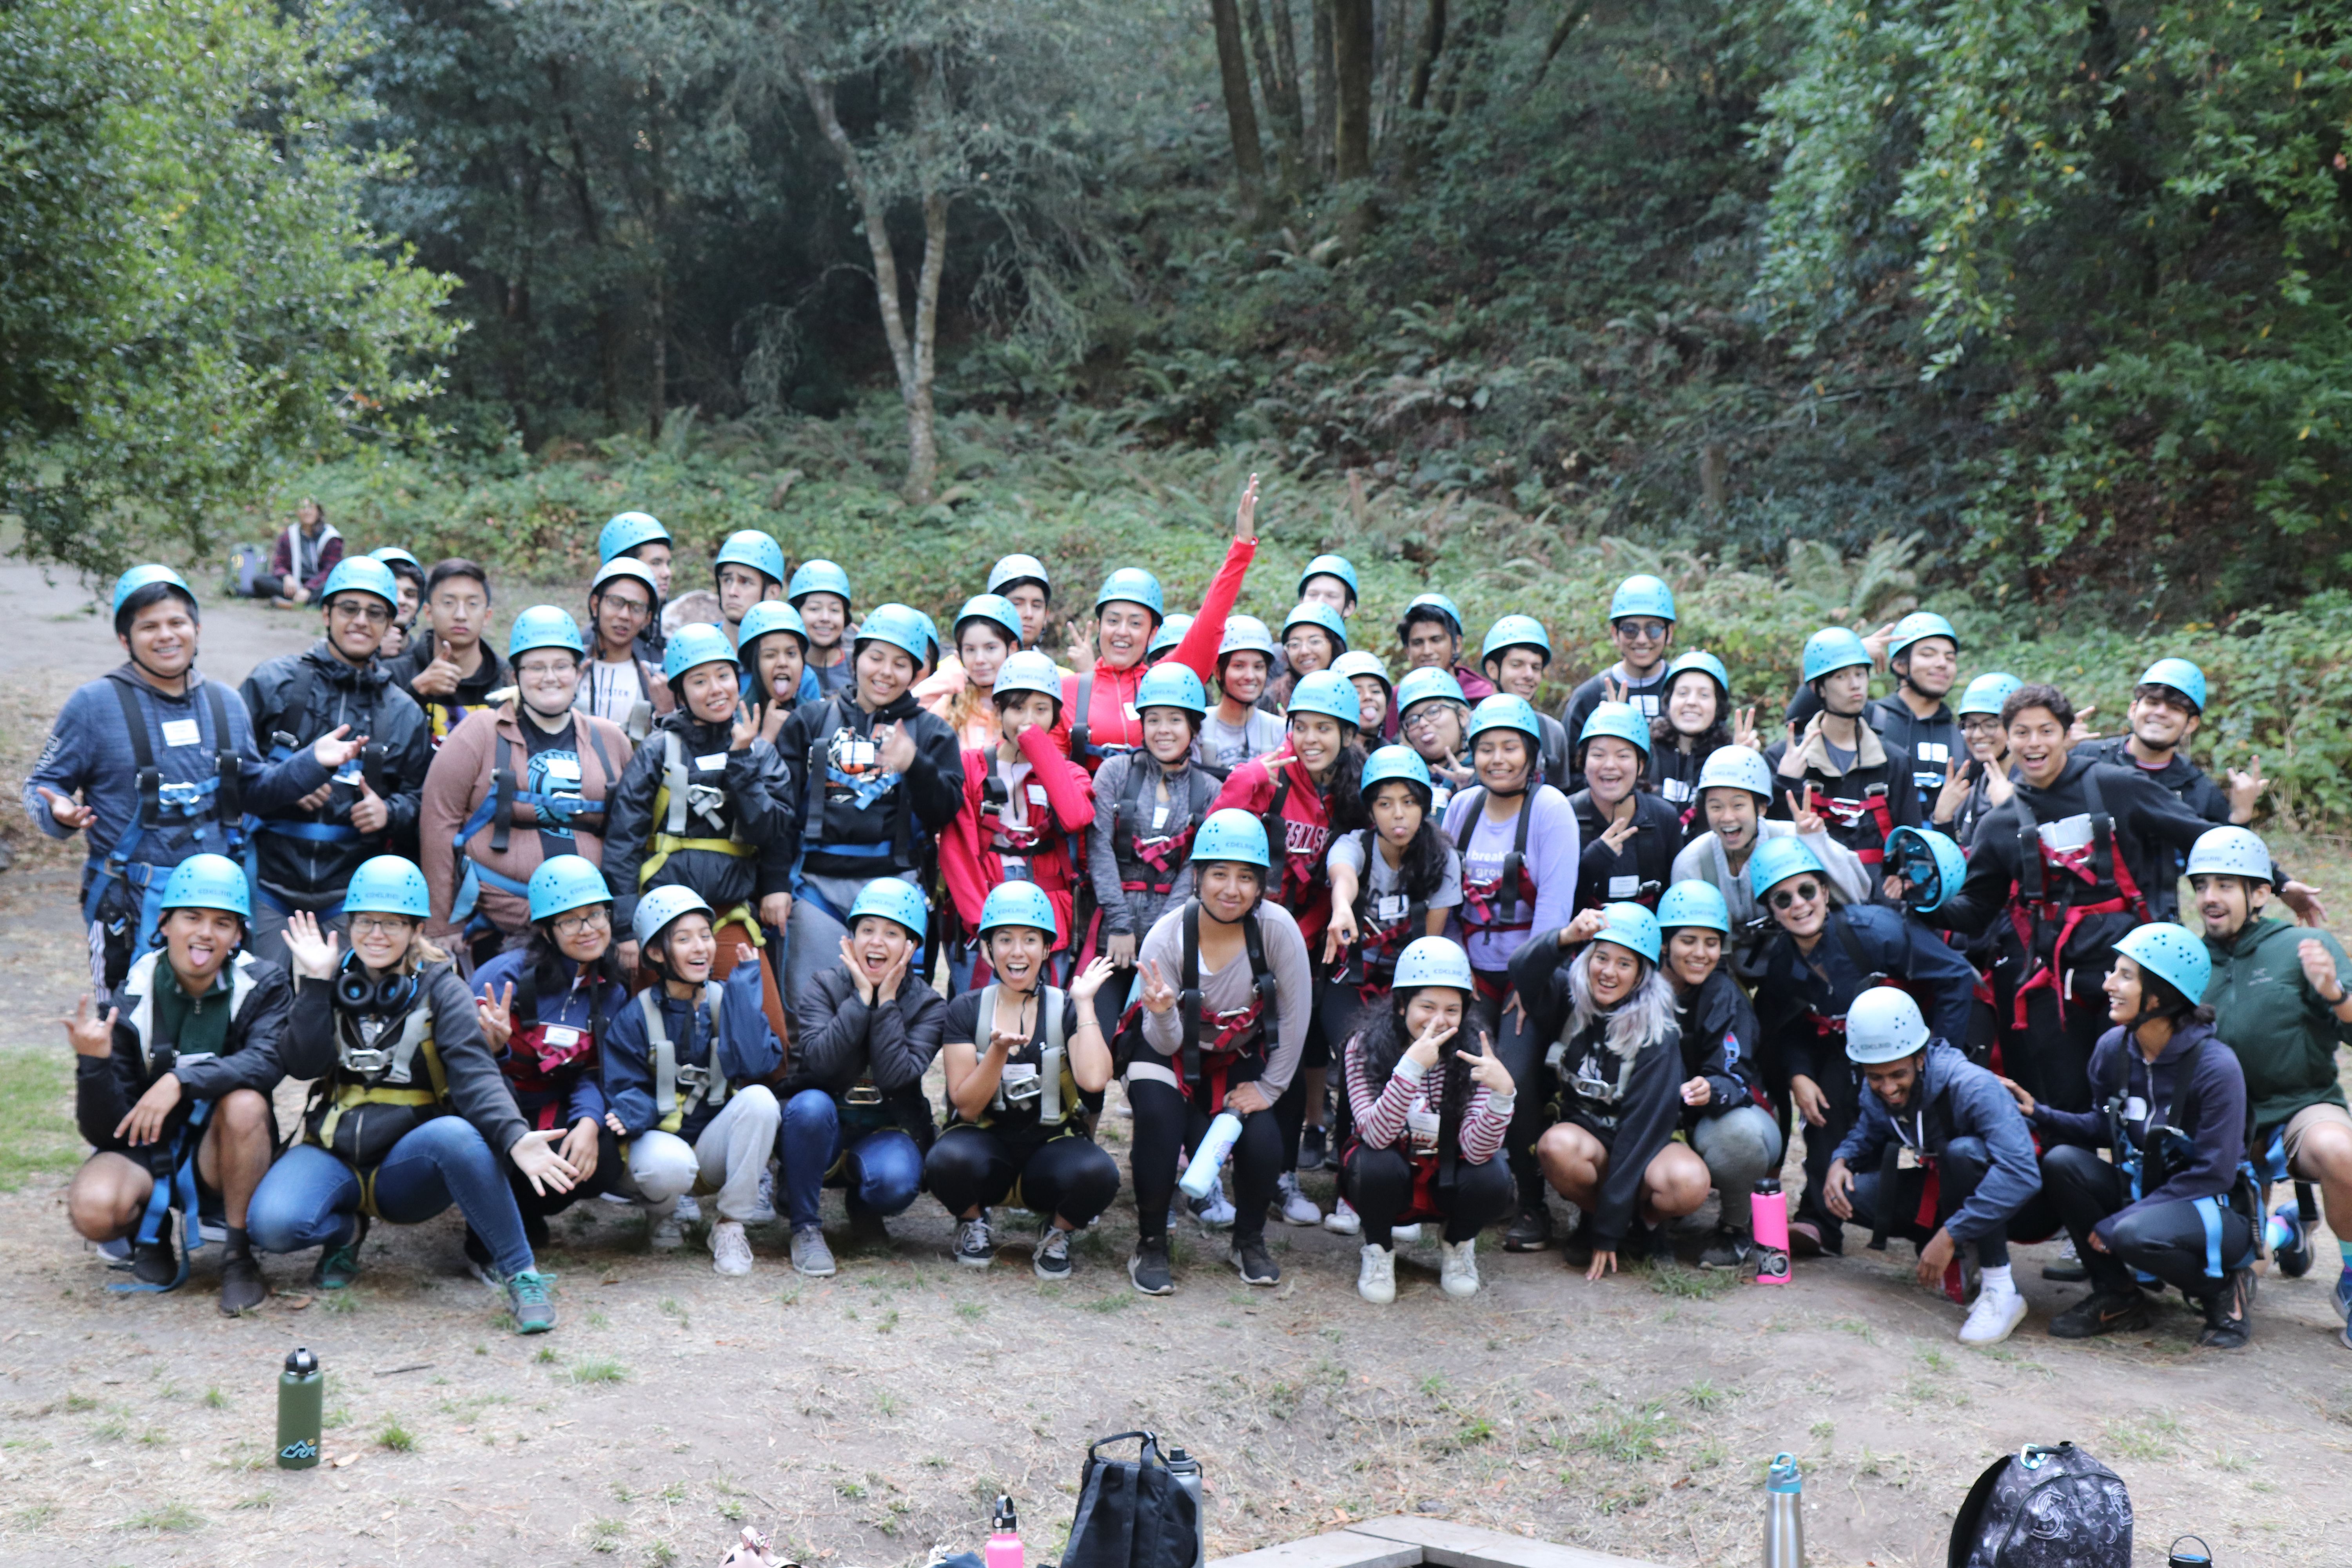 high rope experience group picture